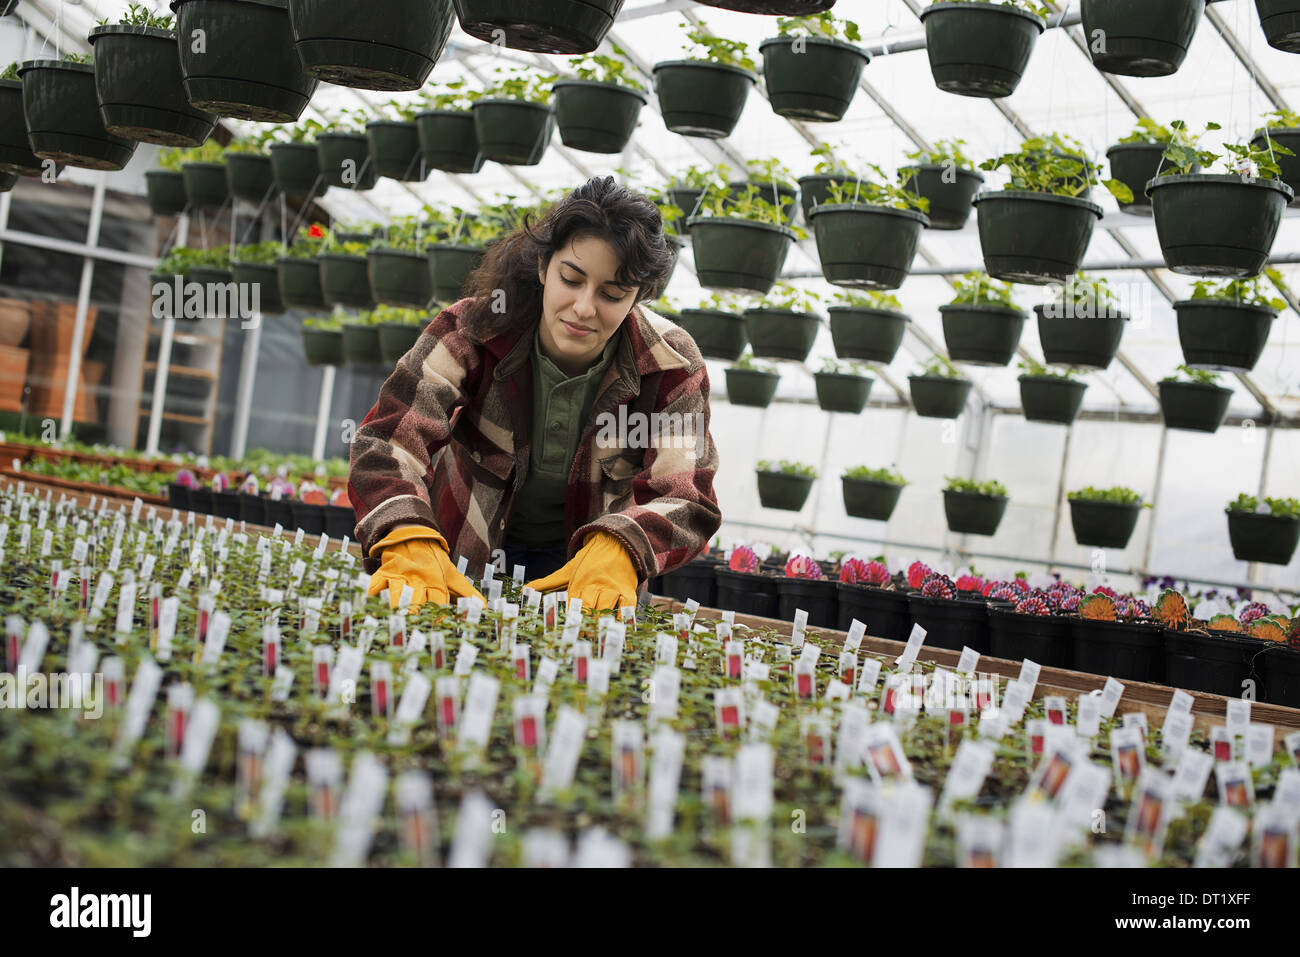 A woman working checking plants and seedlings Stock Photo